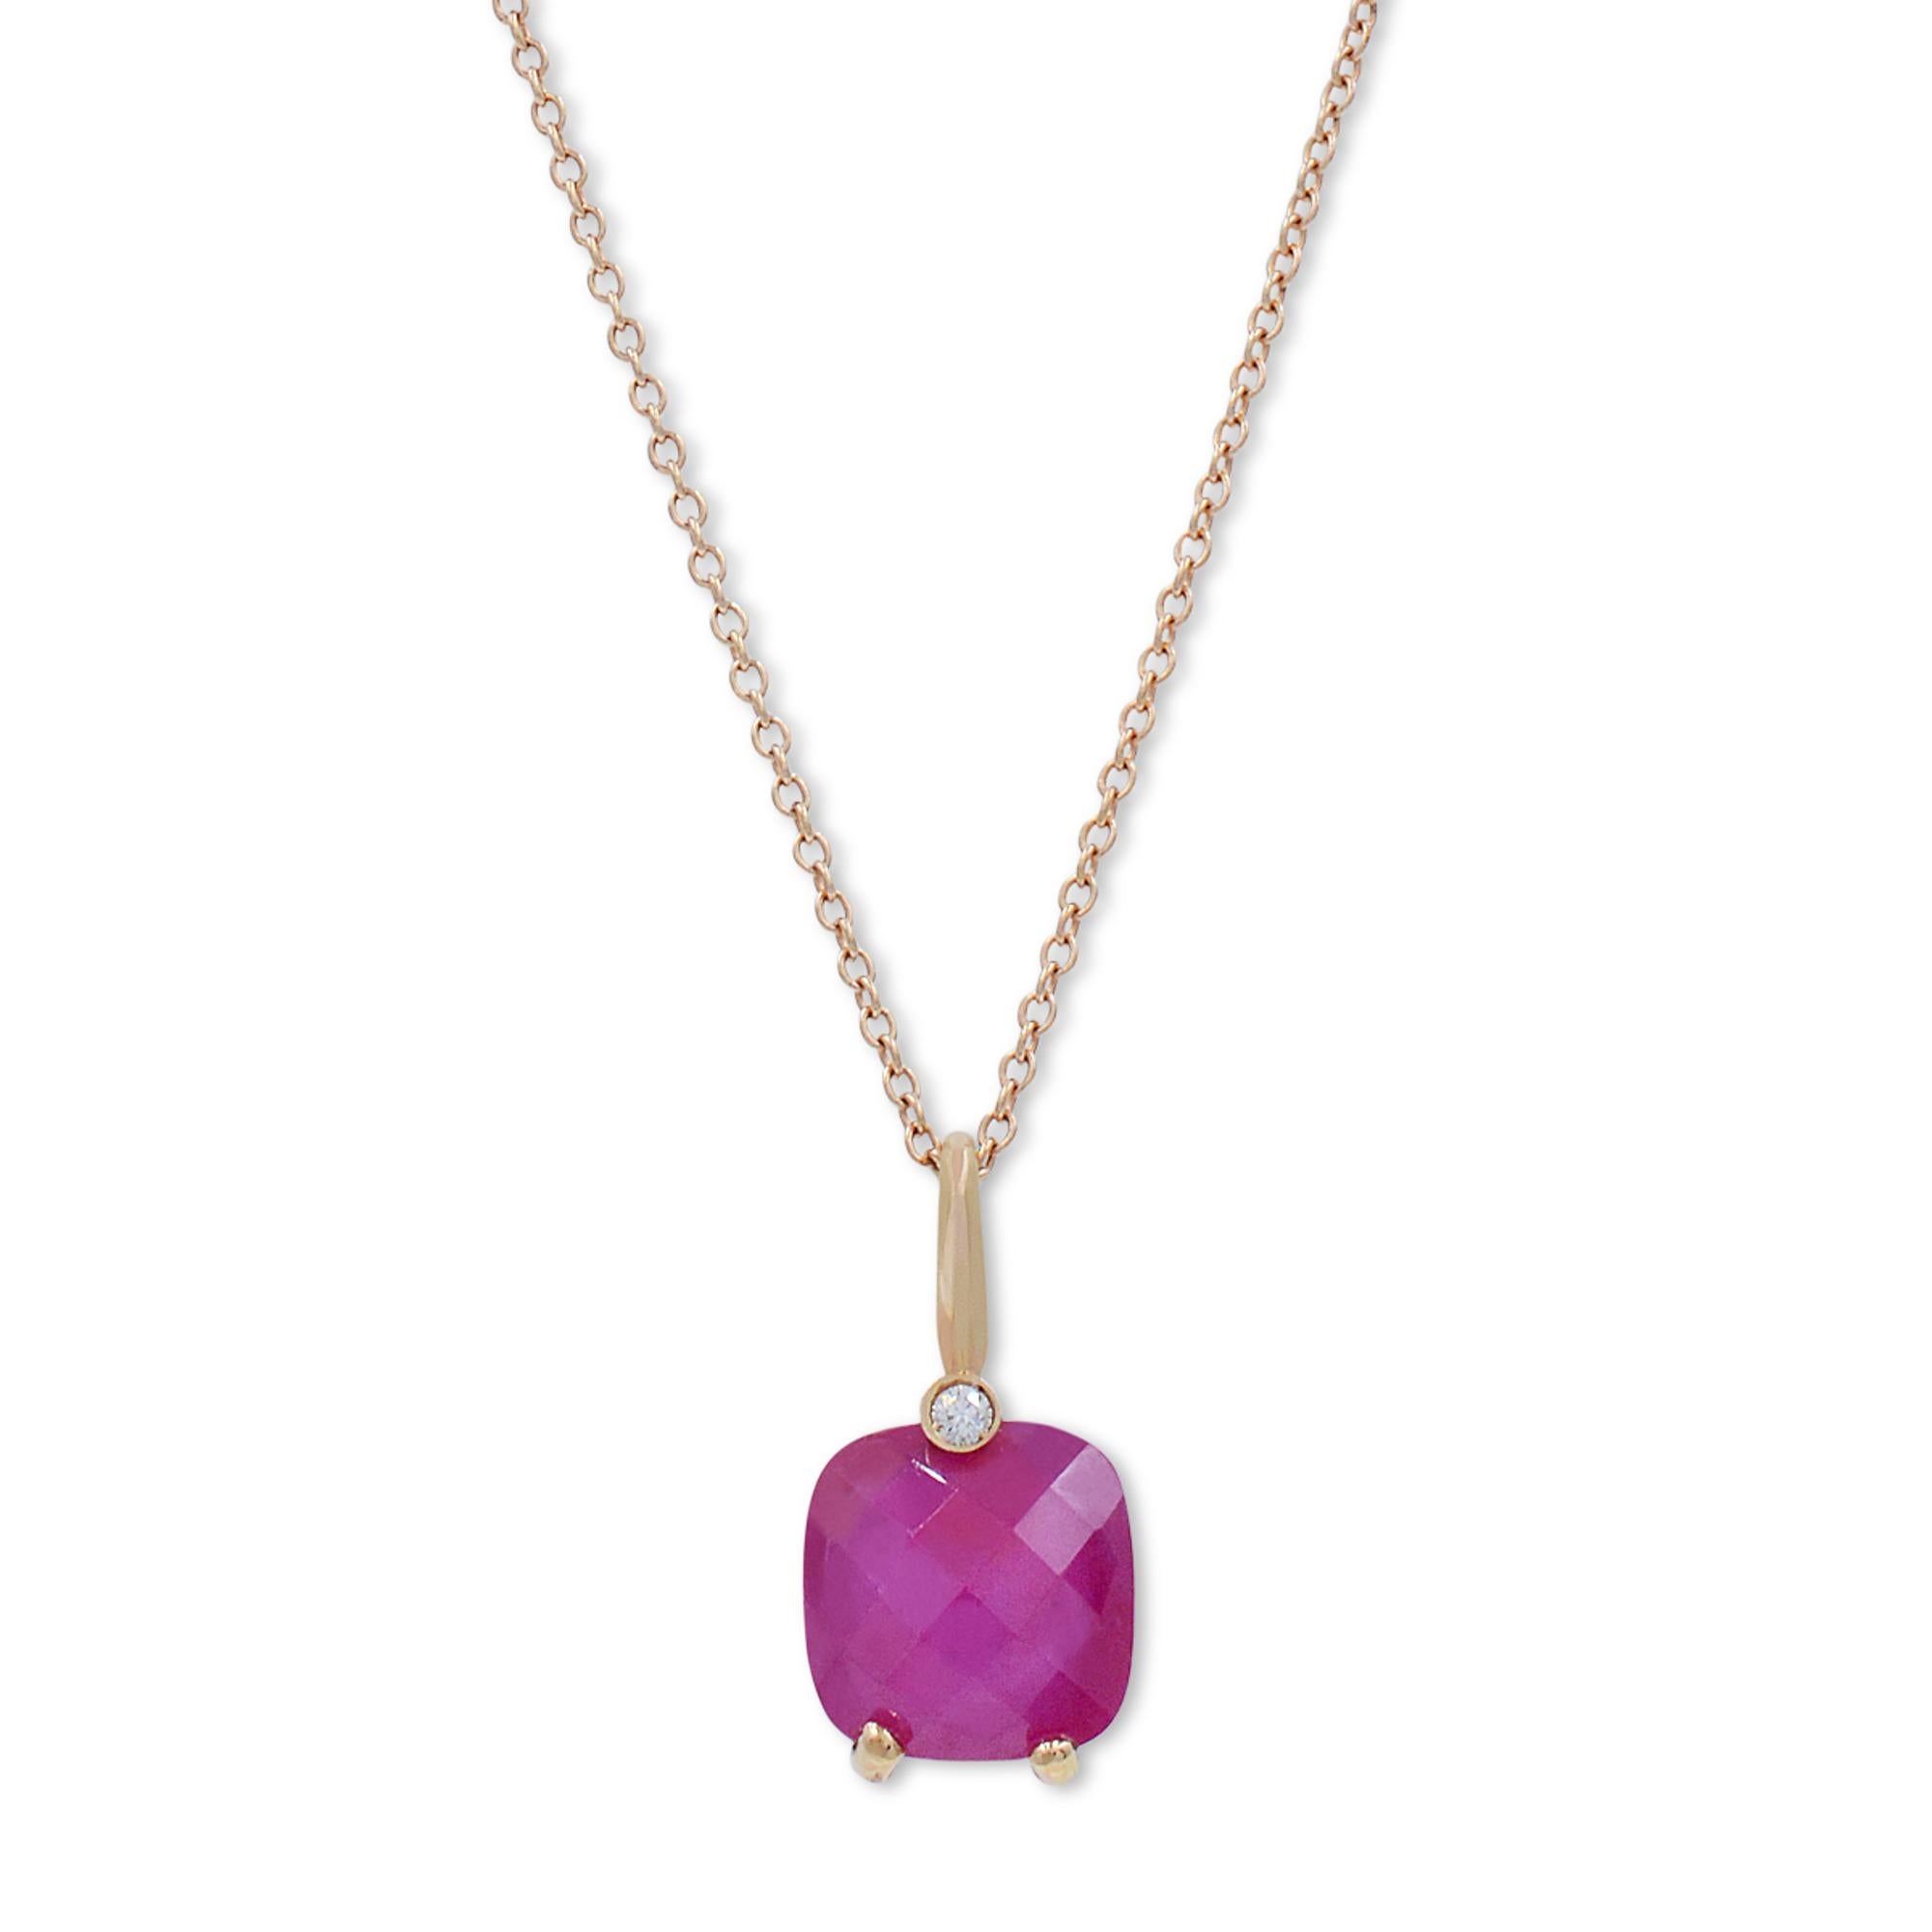 Rachel Koen Diamond Pink Rhodolite Pendant Necklace 18K Yellow Gold In New Condition For Sale In New York, NY